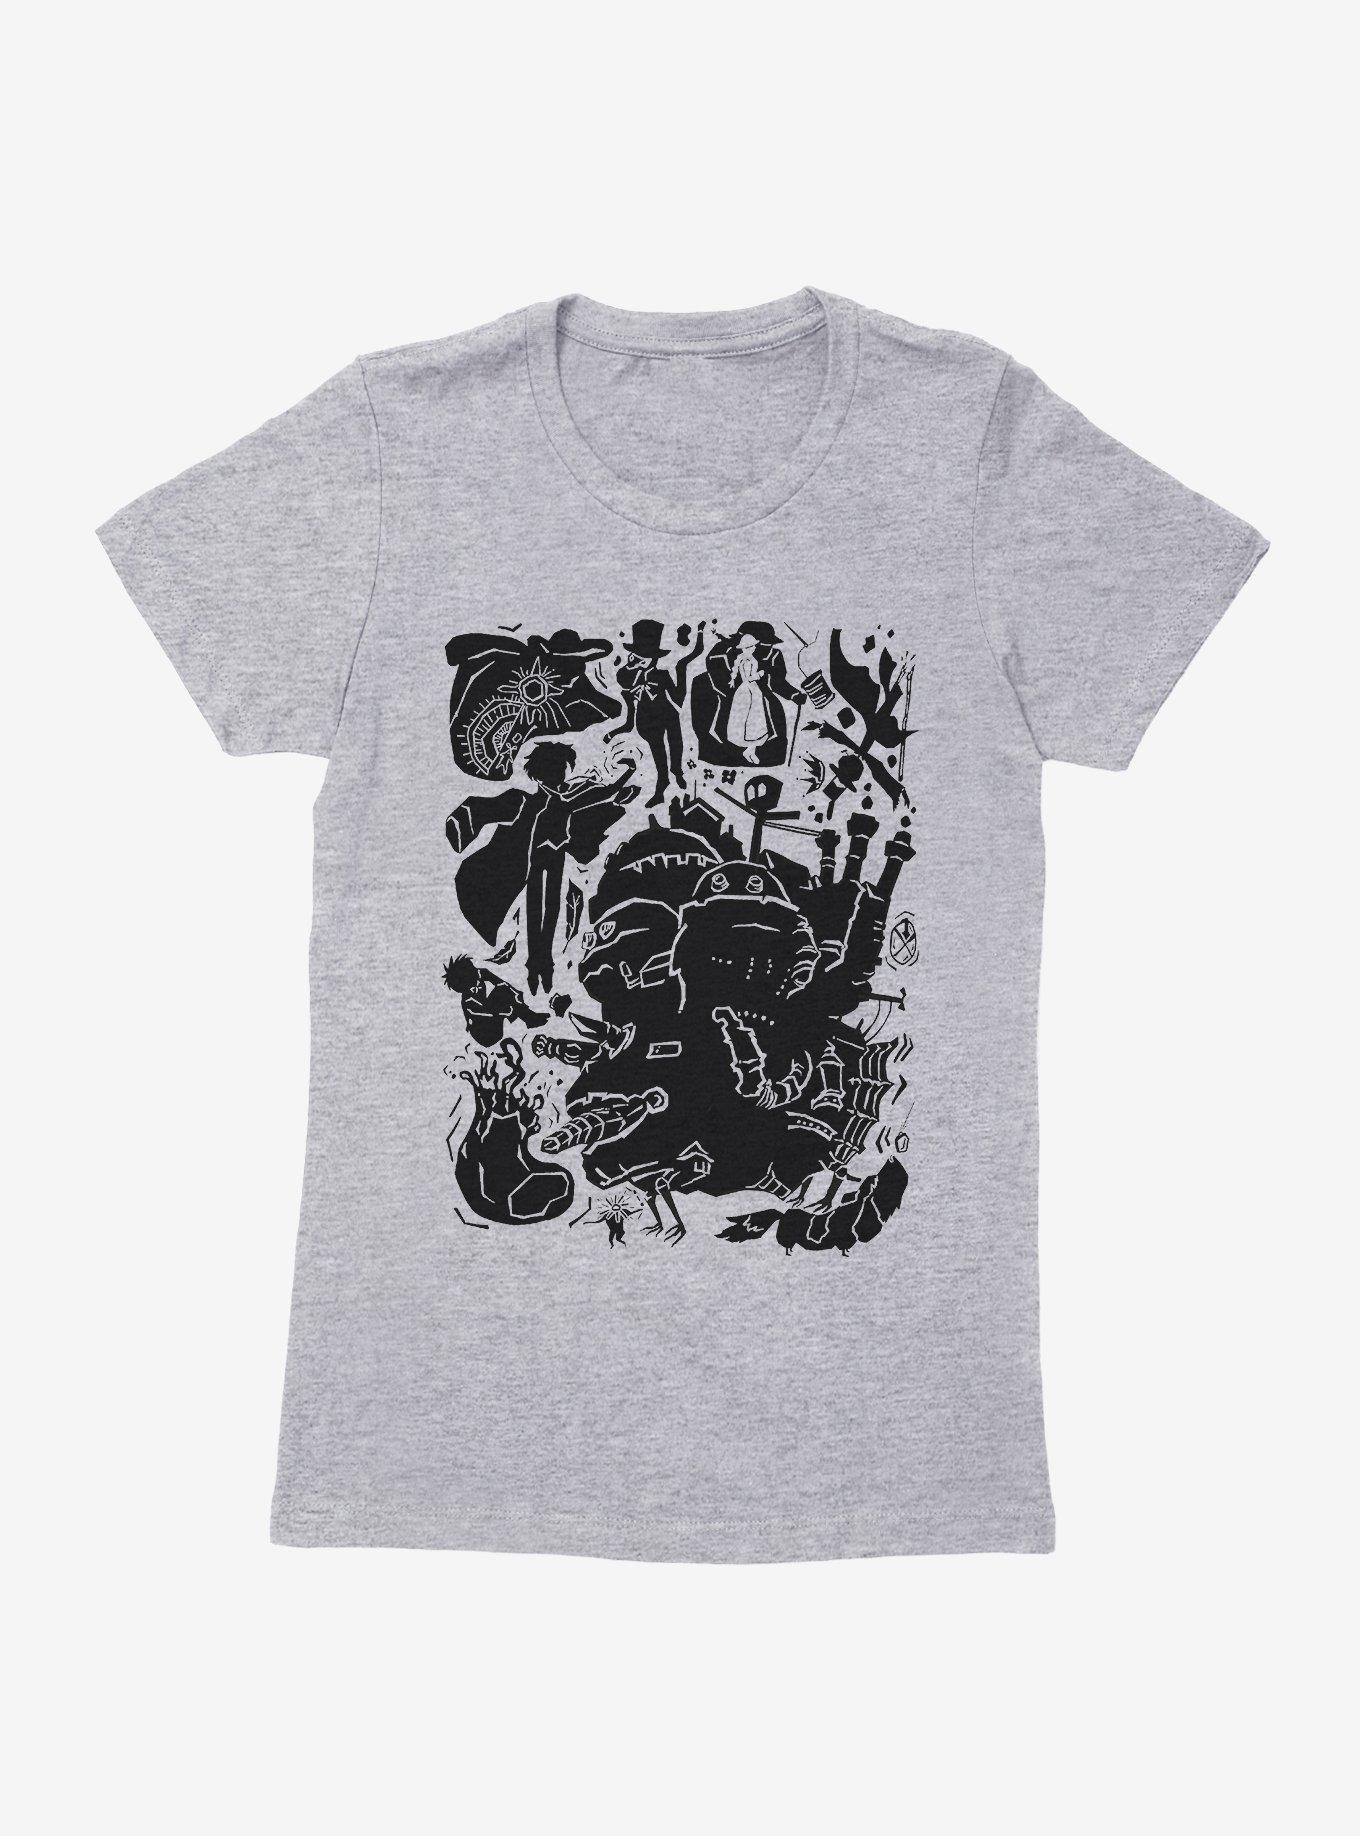 Studio Ghibli Howl's Moving Castle Icons Womens T-Shirt - GREY | BoxLunch